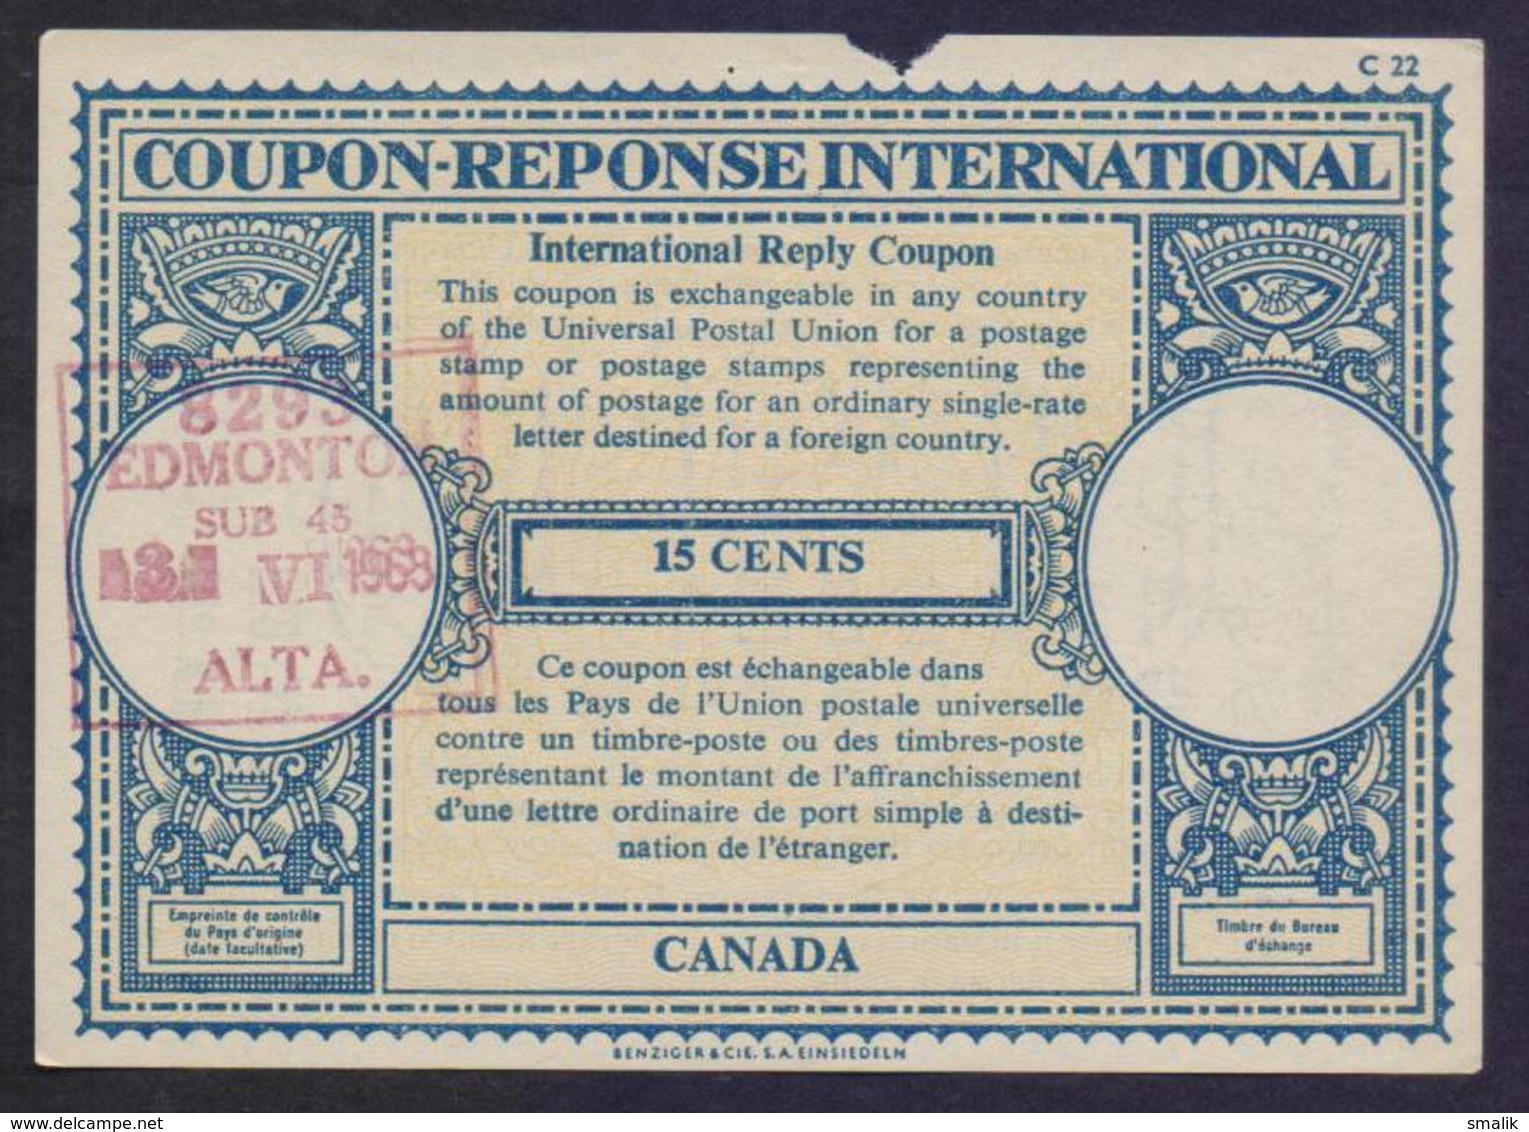 CANADA - 15 Cents London Type IRC COUPON REPONSE INTERNATIONAL REPLY, UPU, Cancelled 3.6.1968, Minor Broken - Antwortcoupons